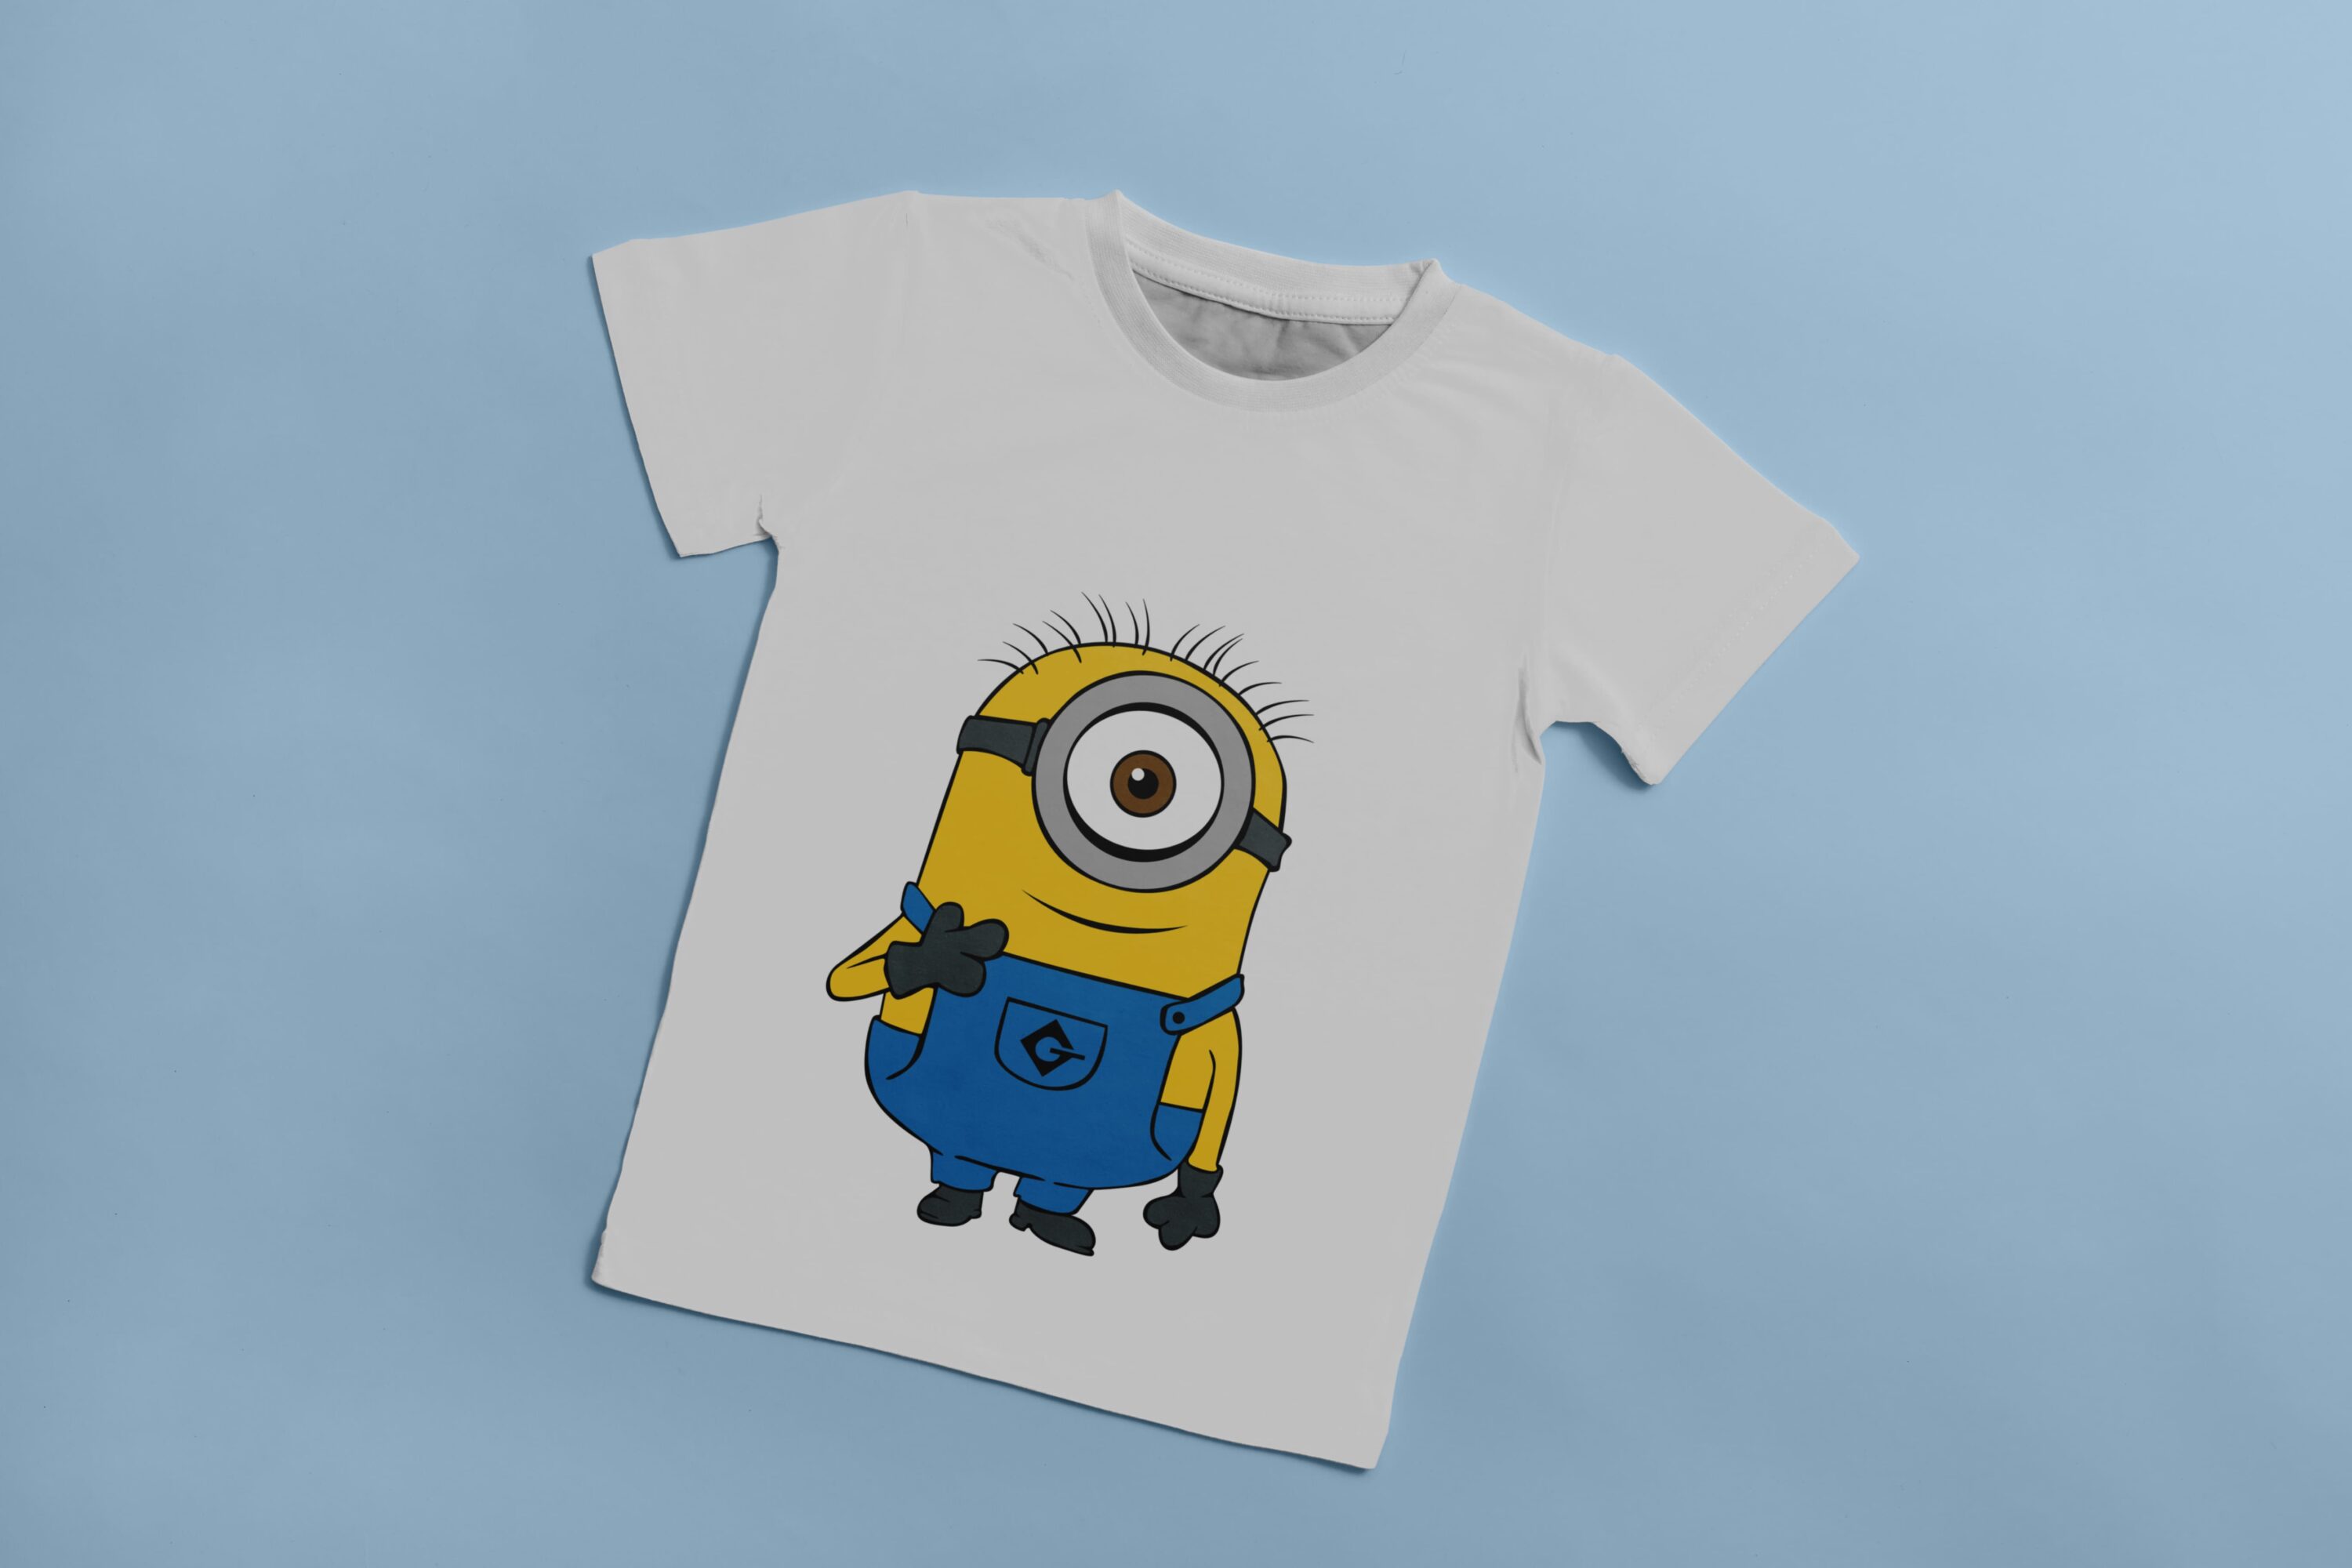 White T-shirt with the image of the character - Minion with one eye.